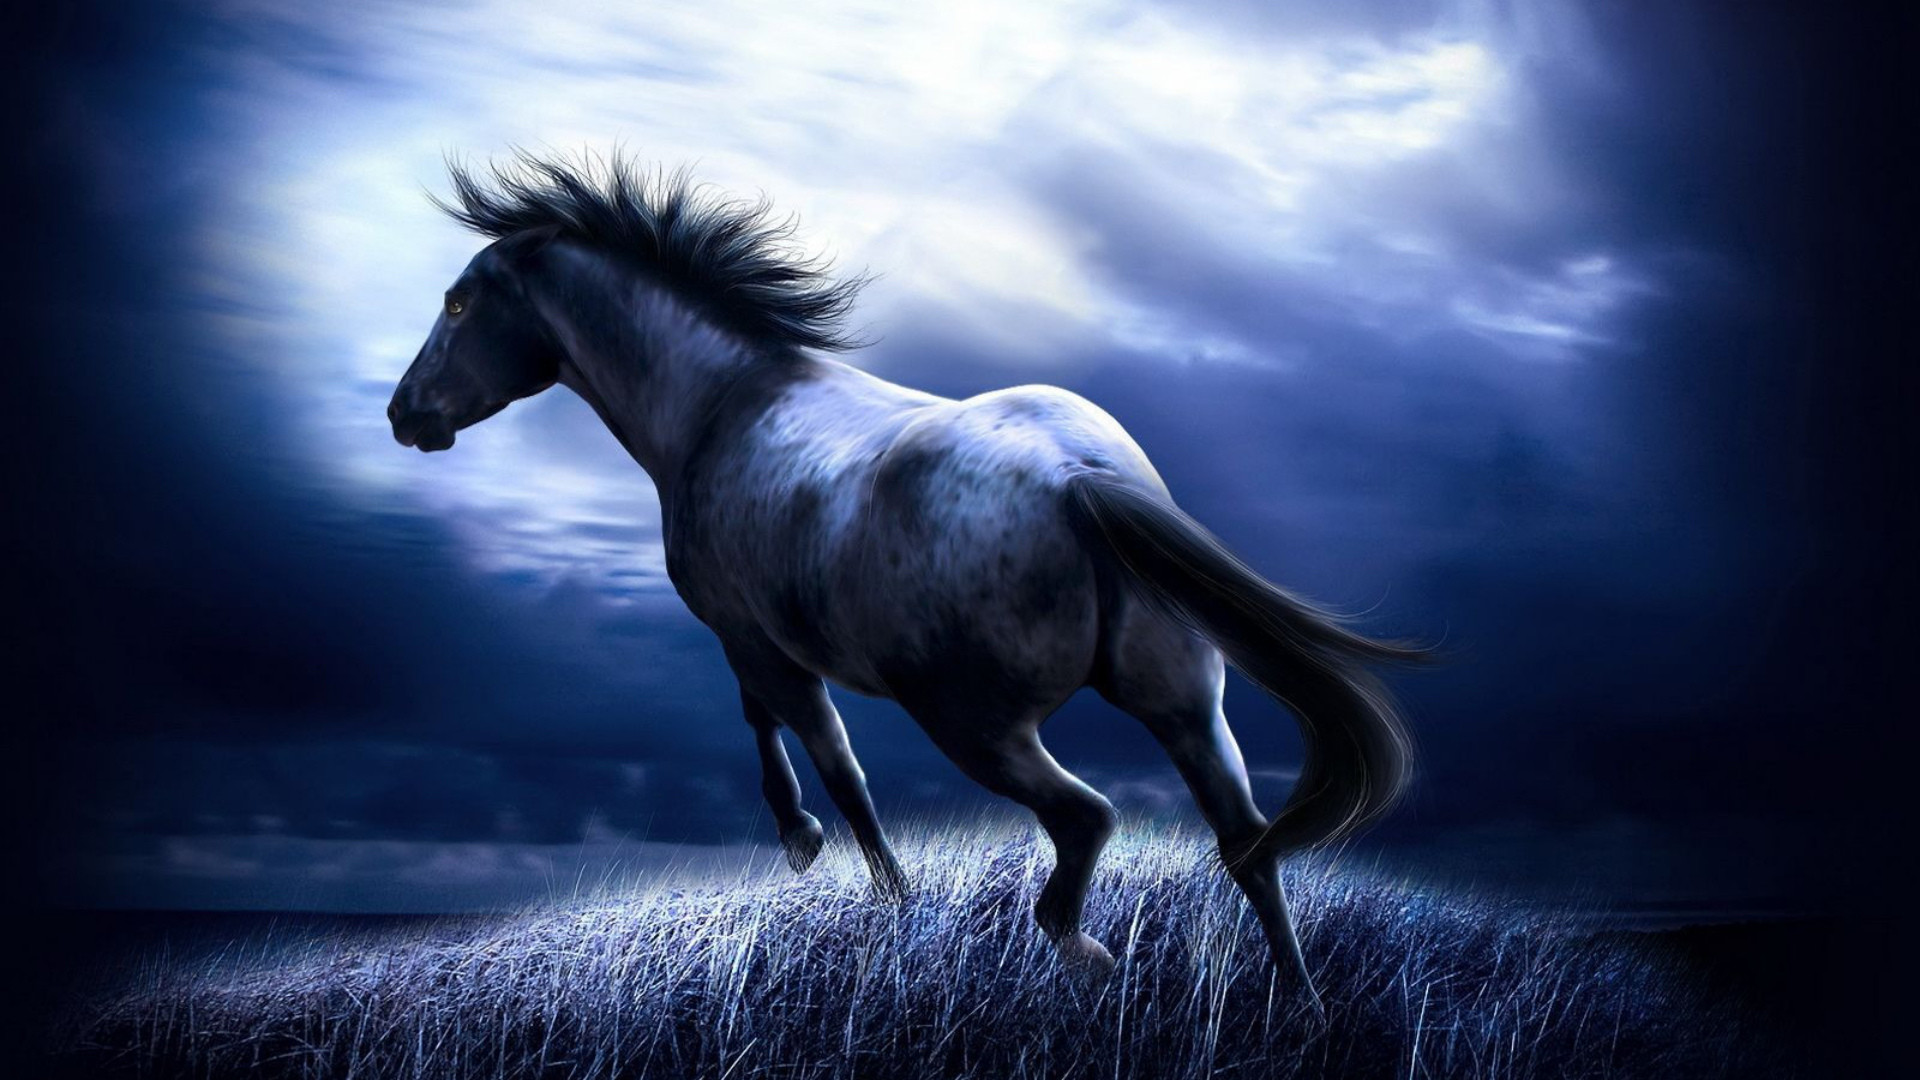 1920x1080 ... Horse Painting Wallpaper ...